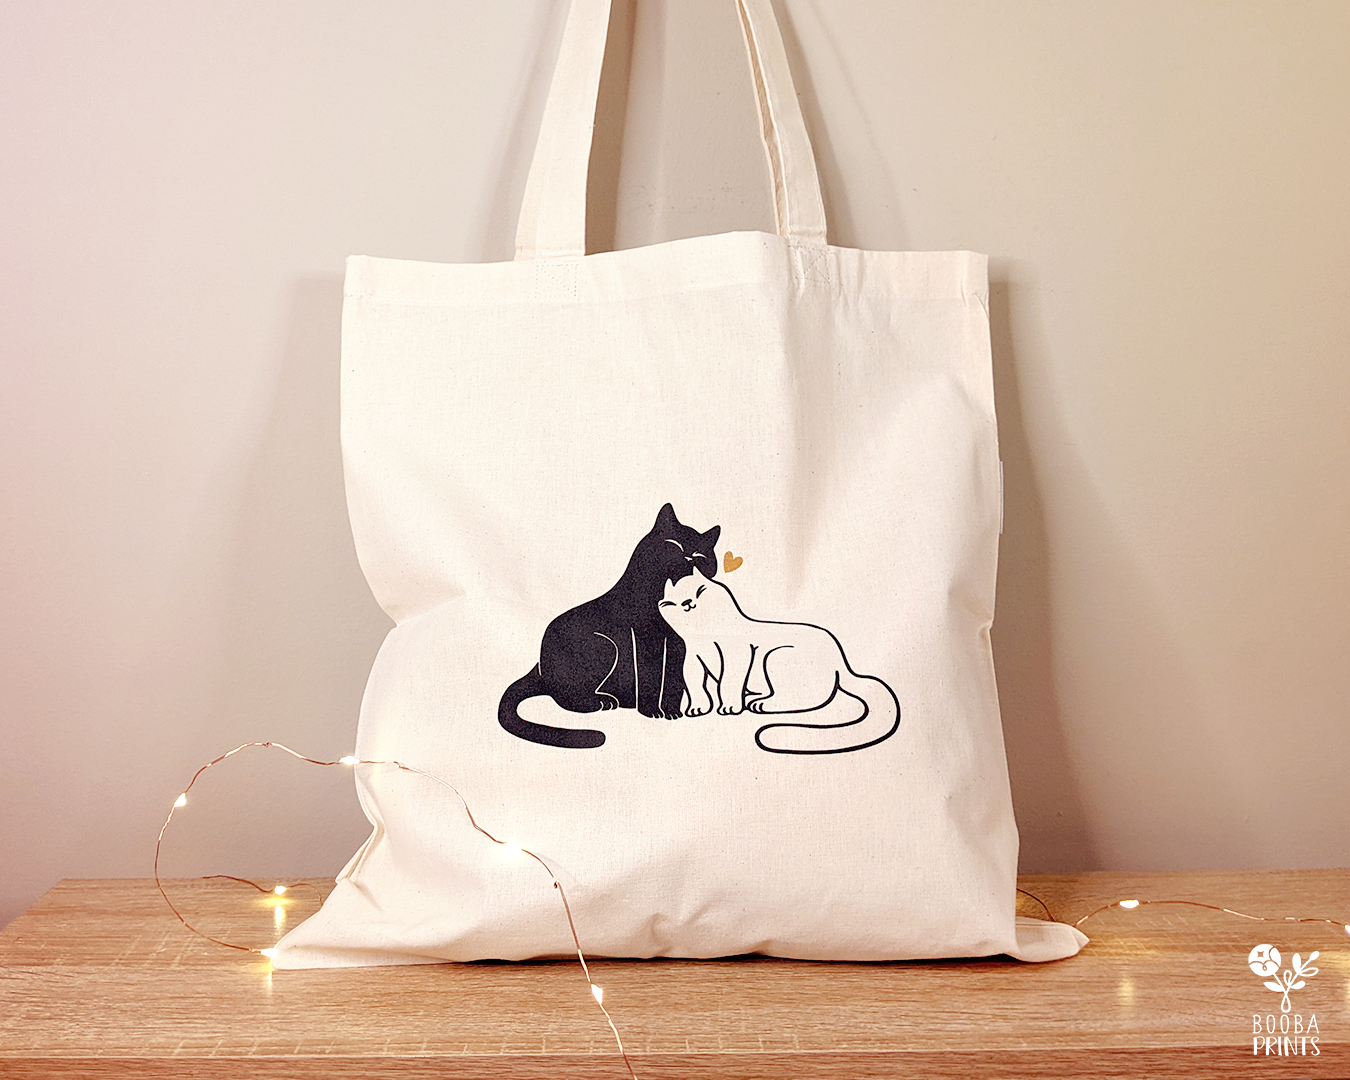 Tote bags designed by Booba Prints